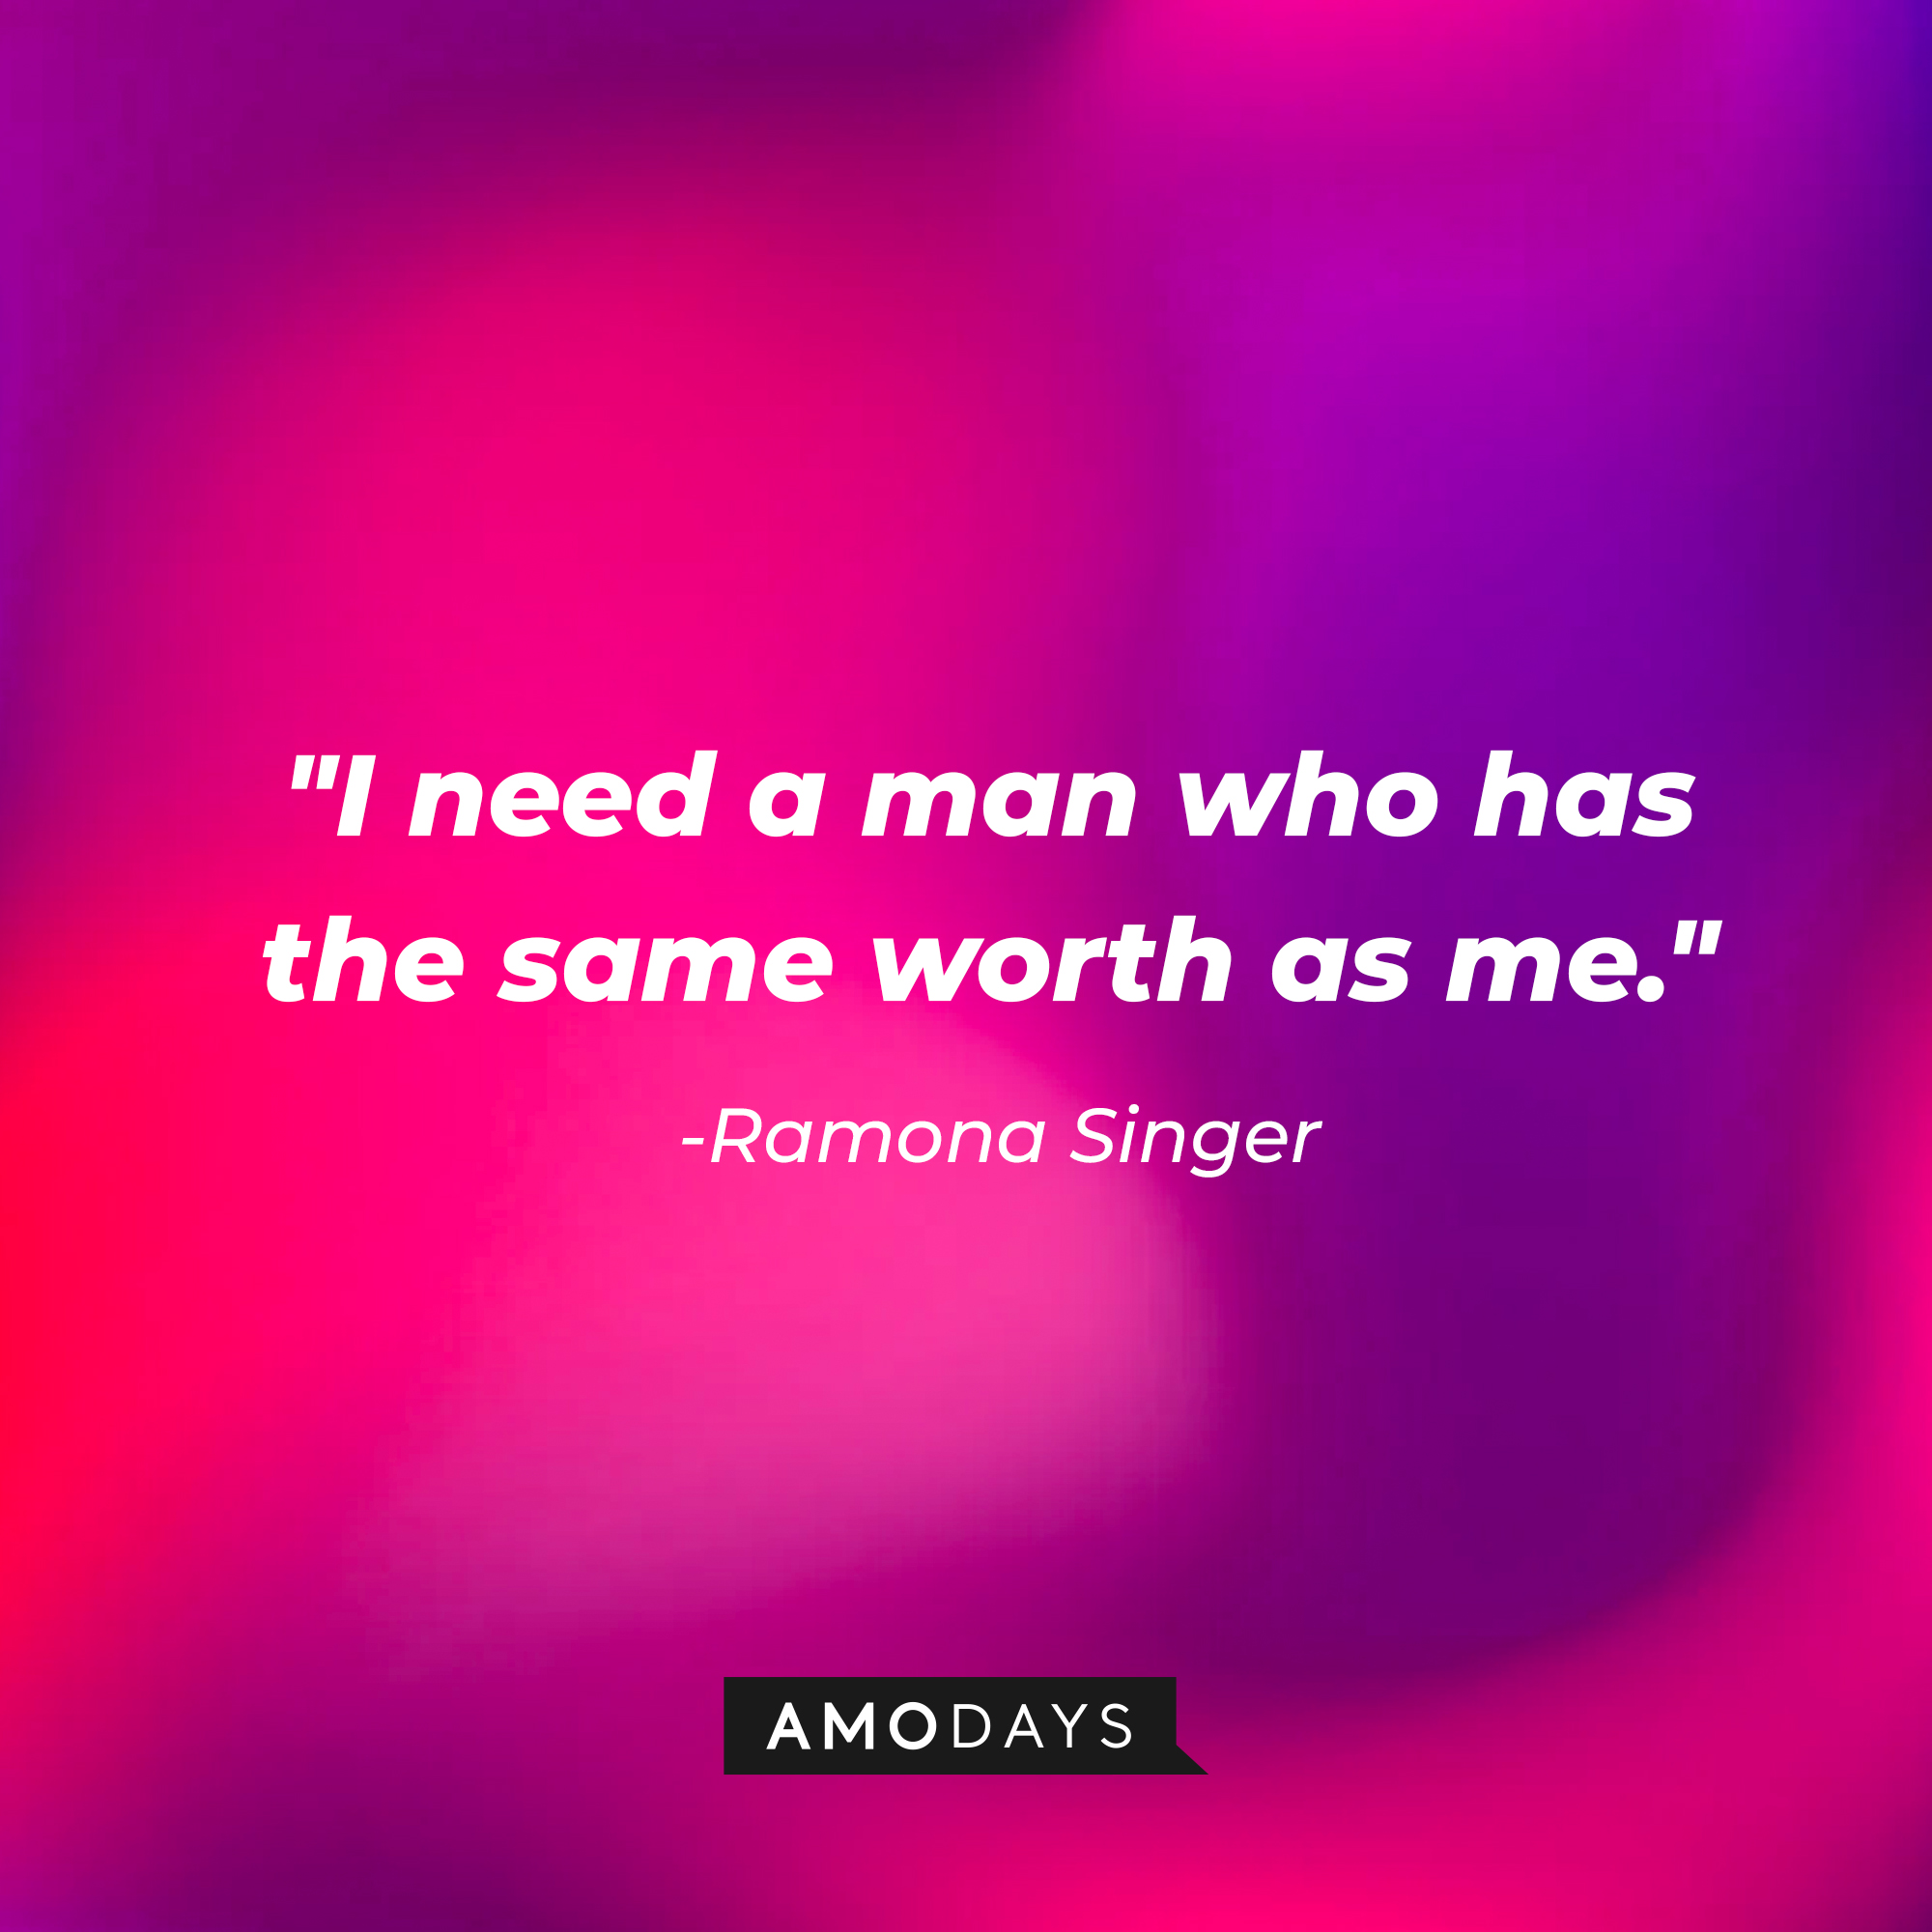 Ramona Singer’s quote: "I need a man who has the same worth as me."  | Source: AmoDays